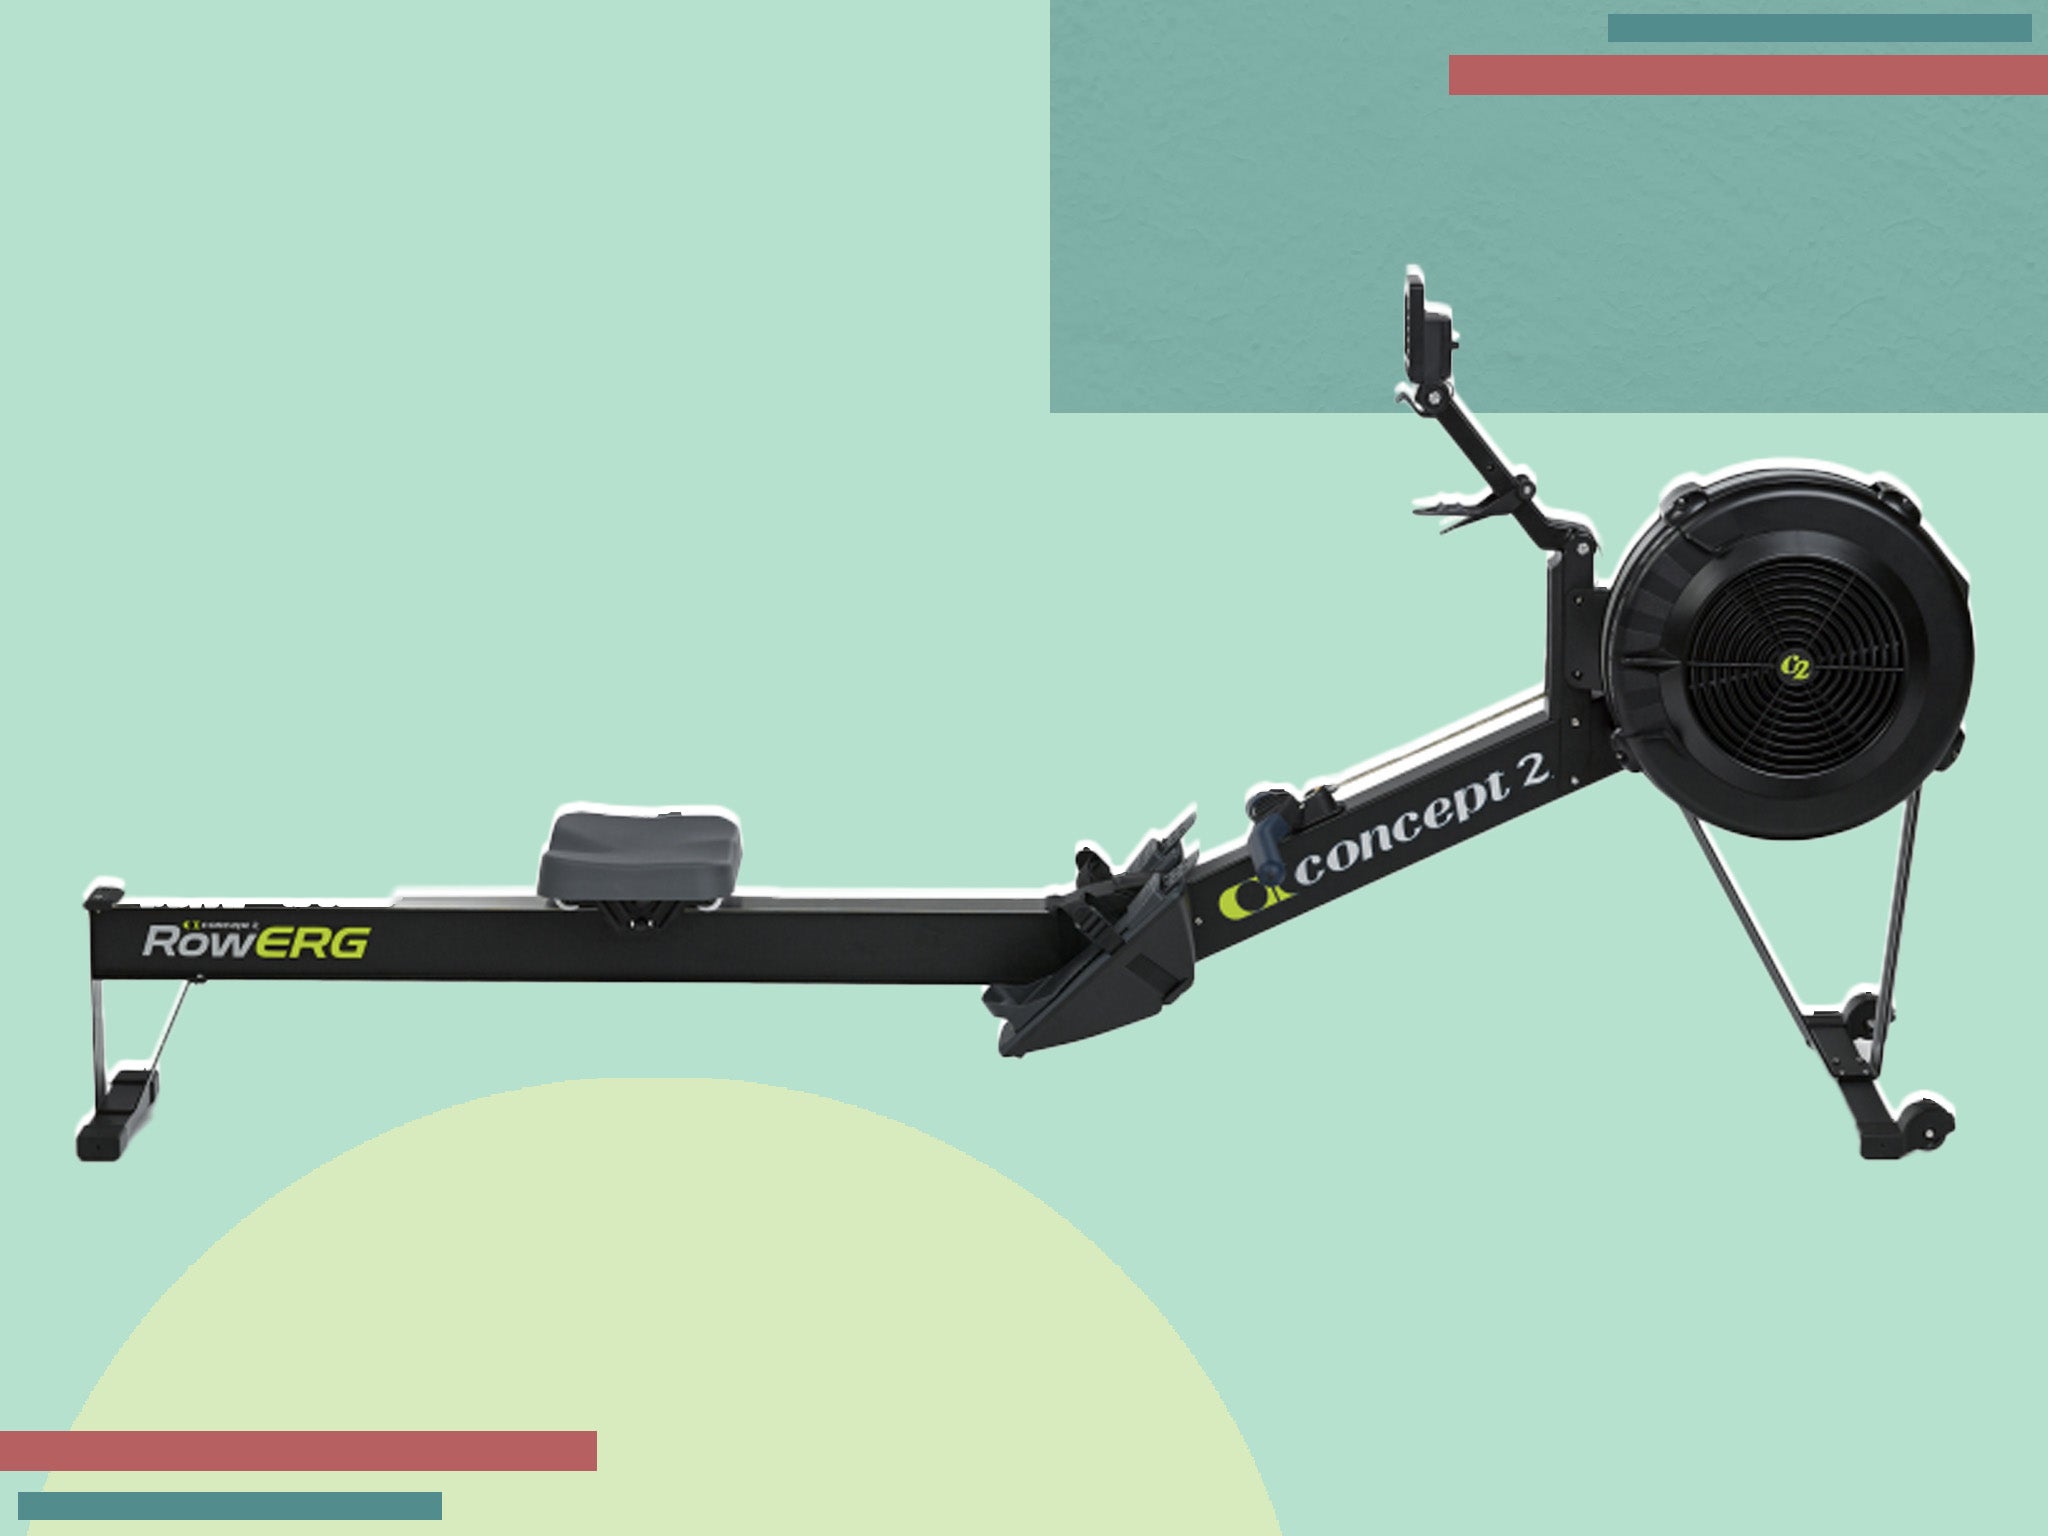 We had this machine tested by an amateur club rower